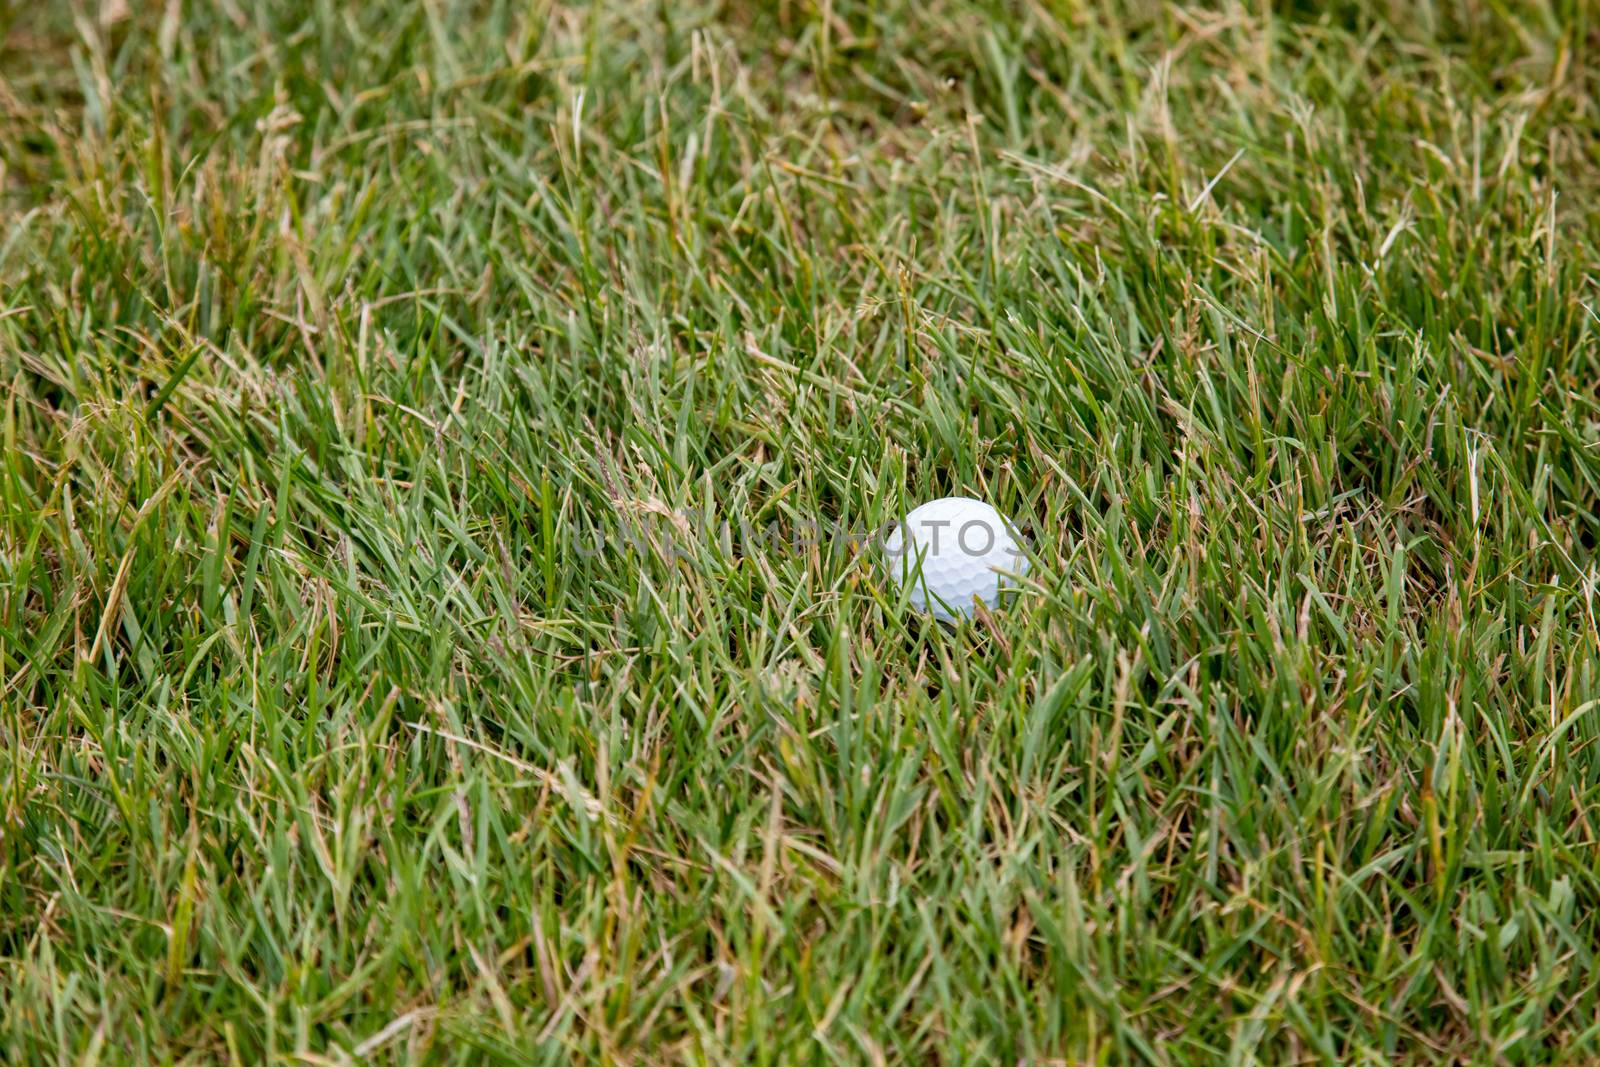 White Golf Ball in Rough Grass by colintemple